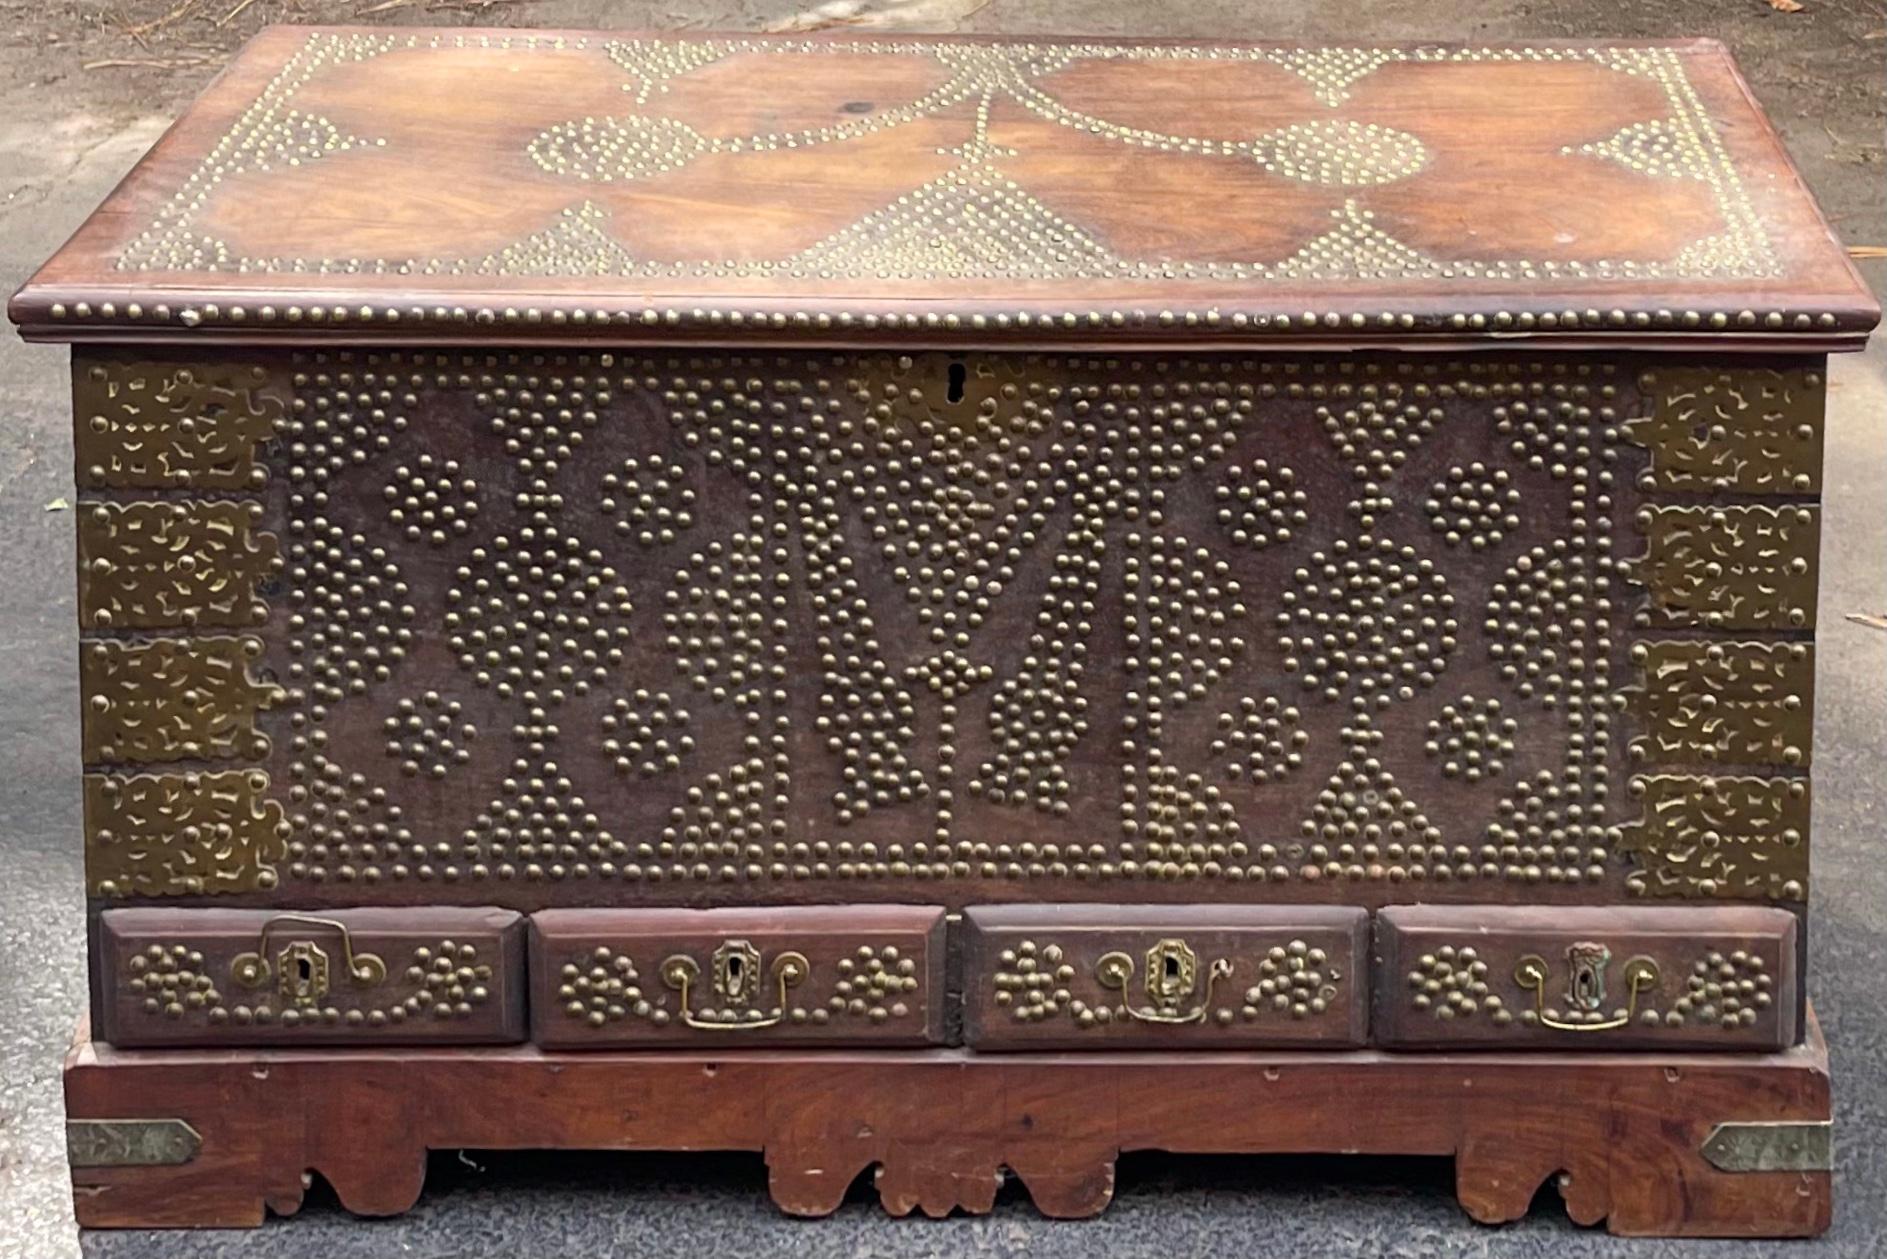 This is an exceptional Anglo-Indian brass clad hand forged trunk. It is carved Padauk wood with an elaborate brass studded / nailhead design on the front and top. Note the hinges and handles! A great statement piece!

My shipping is only for the